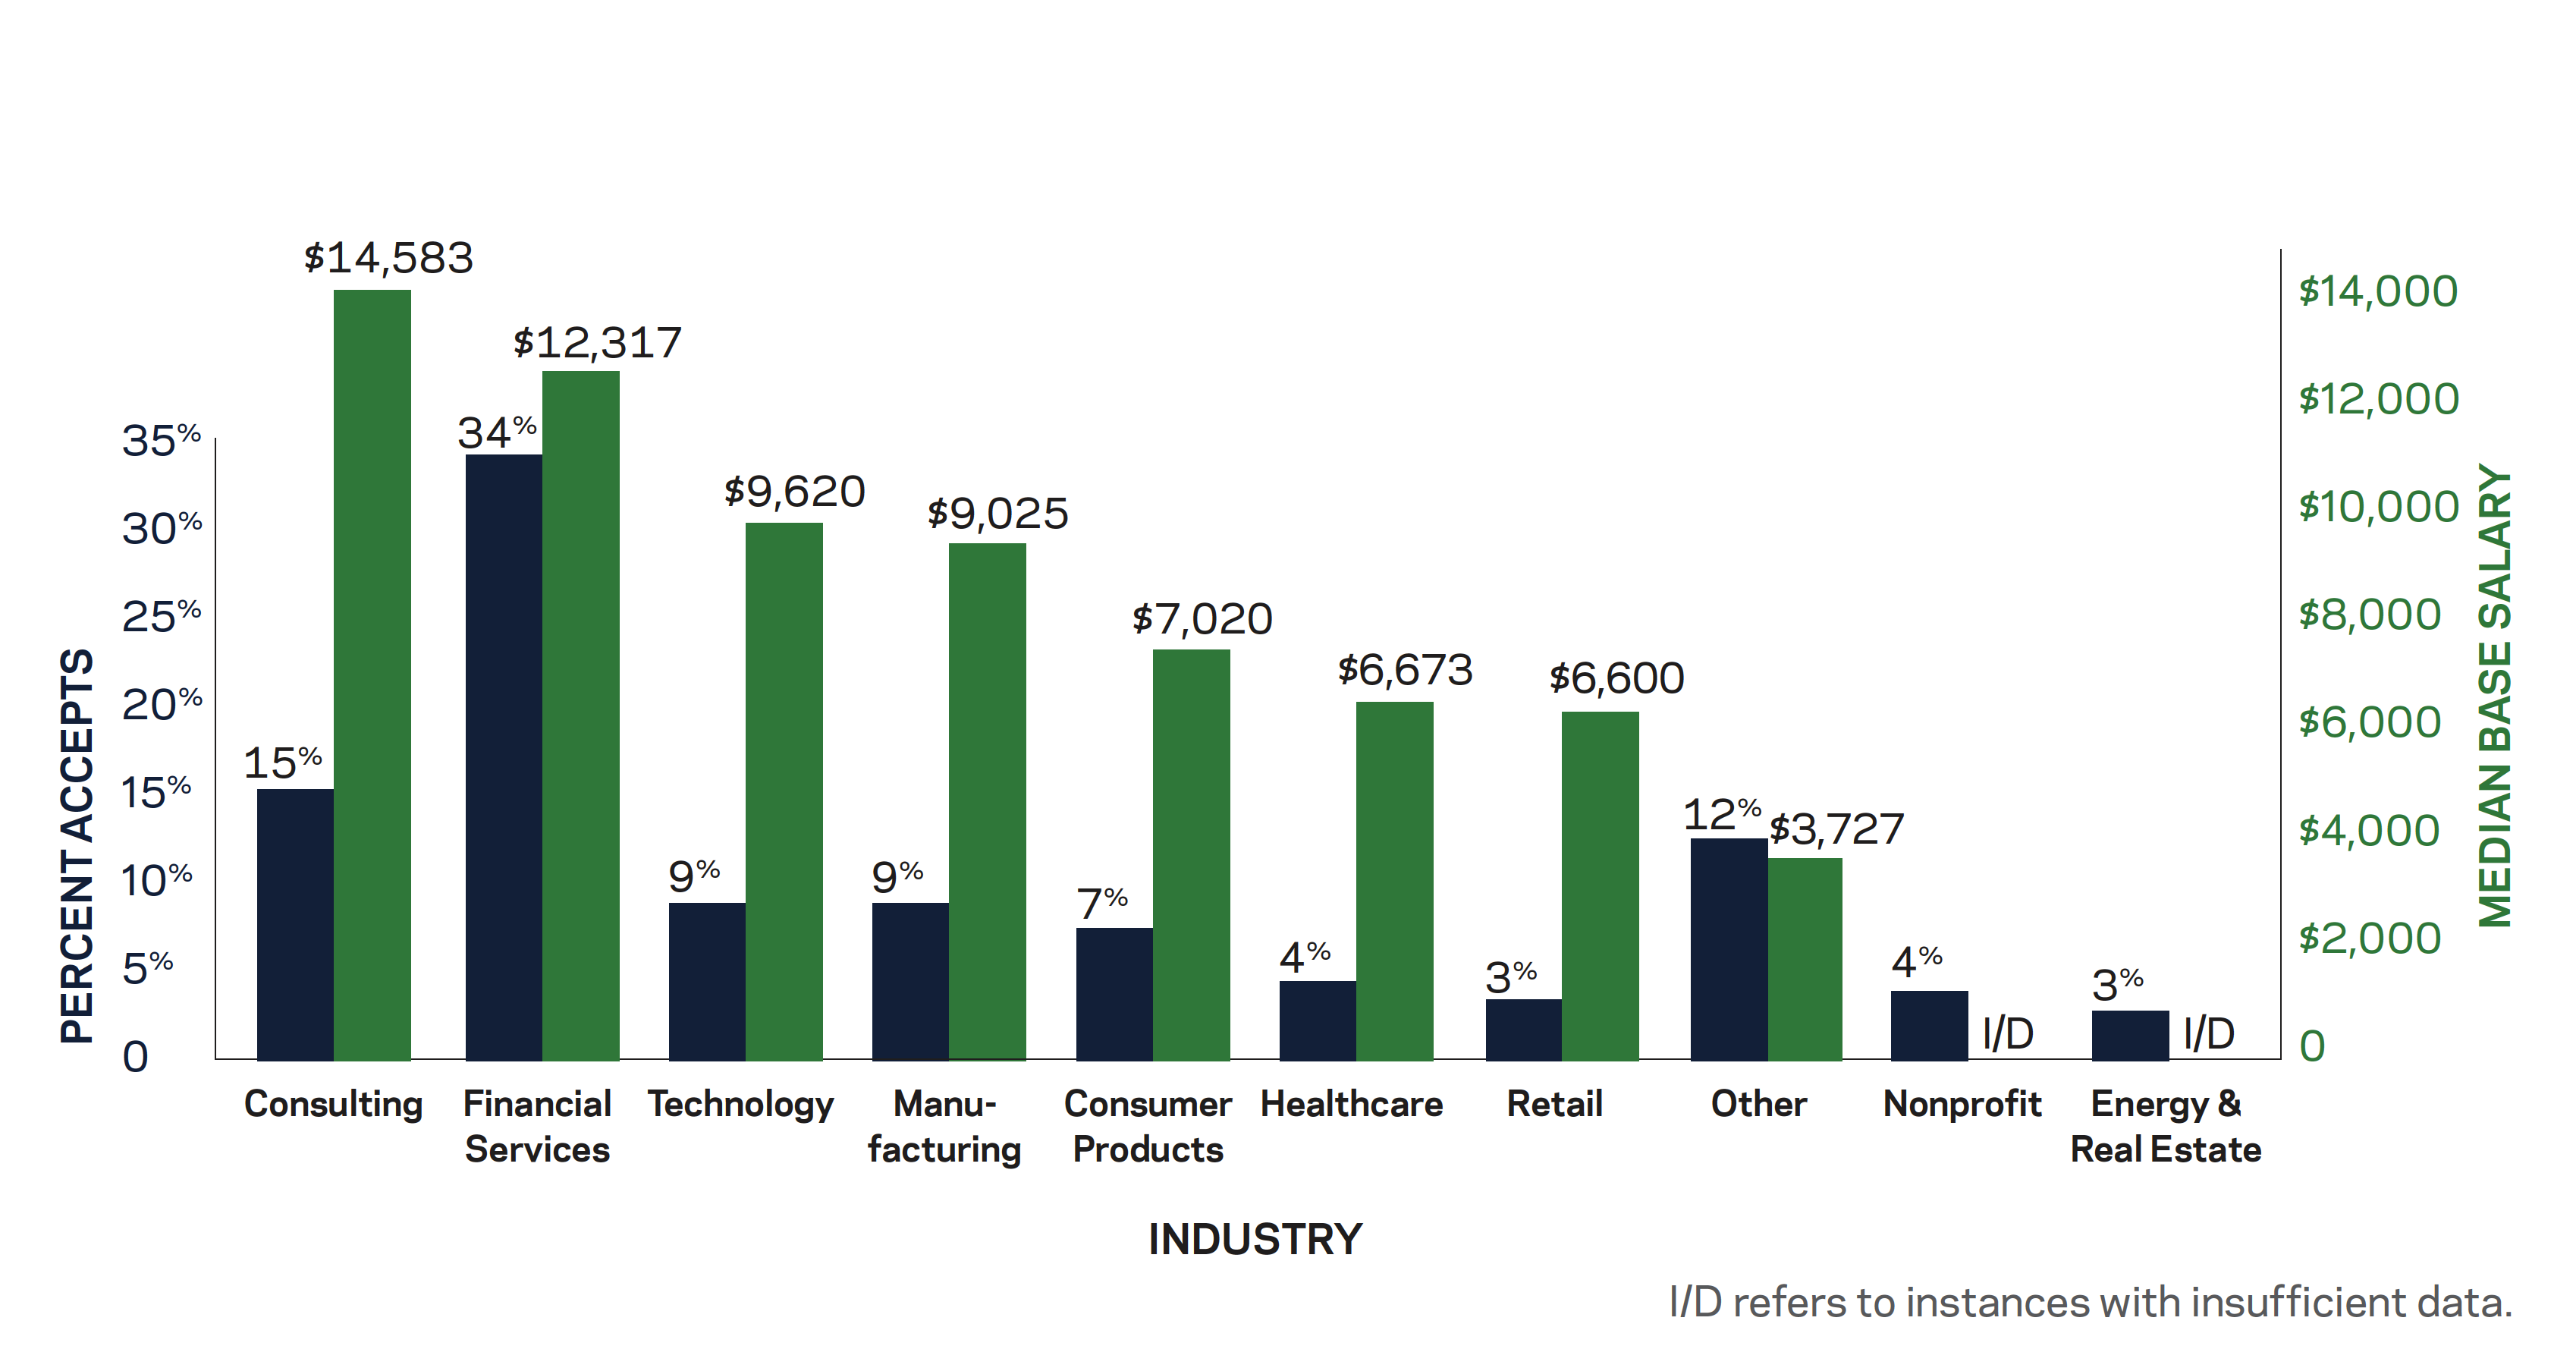 Graph showing percent accepts and median base salary by industry. Consulting: 15%, $14583. Financial Services: 34%, $12317. Technology: 9%, $9620. Manufacturing: 9%, $9620. Consumer Products: 7%, $7020. Healthcare: 4%, $6673. Retail: 3%, $6600. Other: 12%, $3727. Nonprofit: 4%, insufficient data. Energy and Real Estate: 3%, insufficient data. 